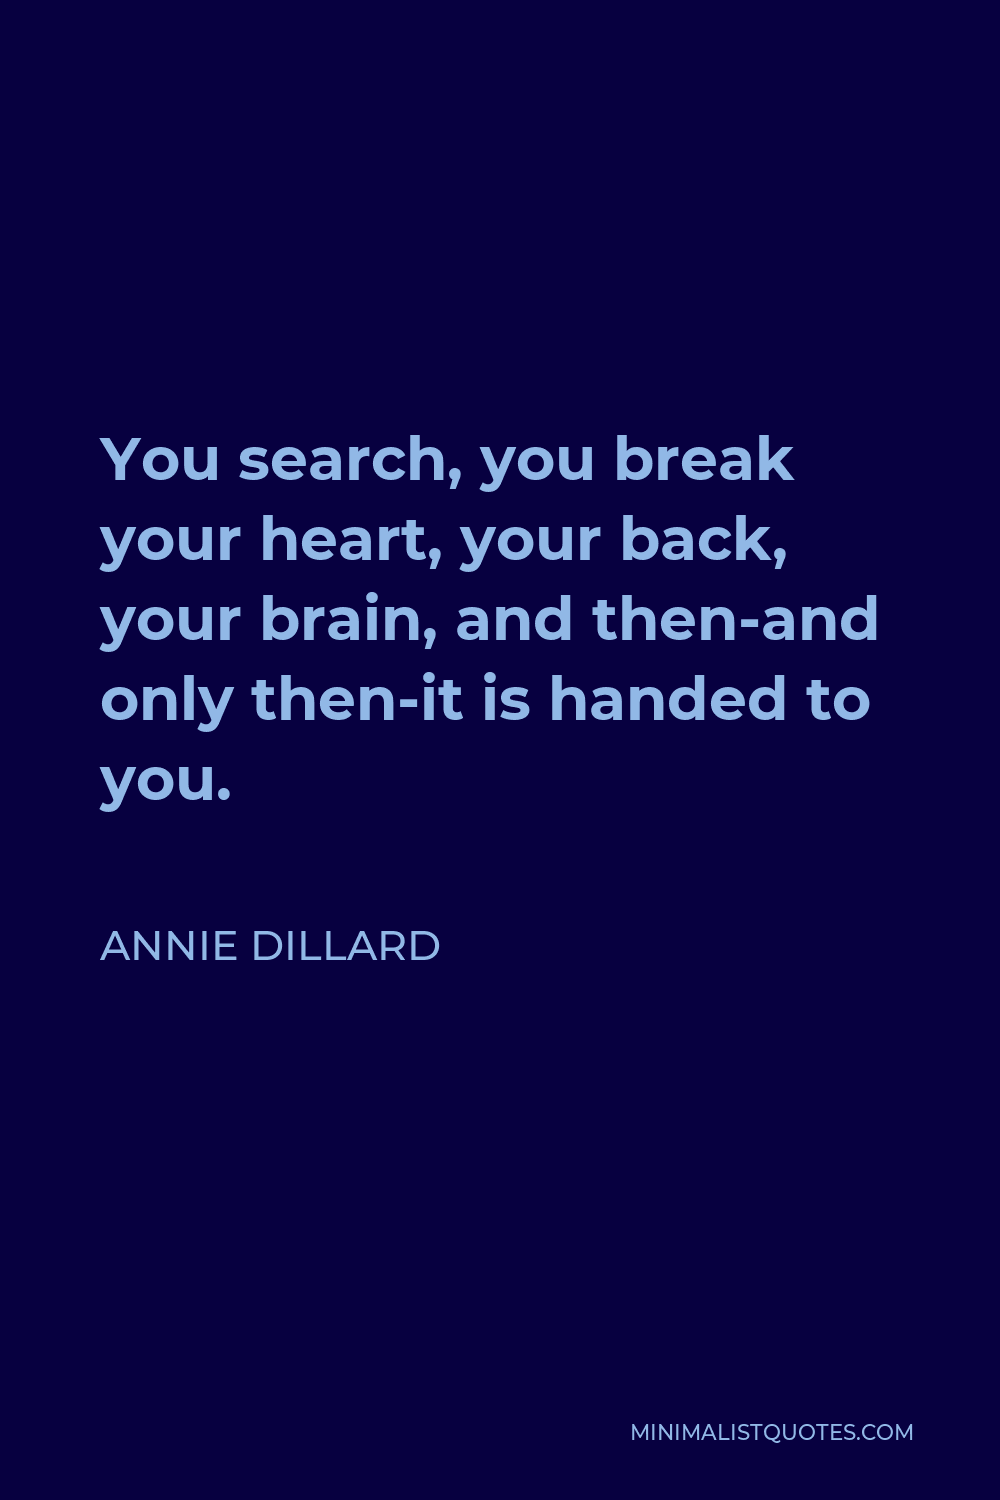 Annie Dillard Quote: You search, you break your heart, your back, your ...